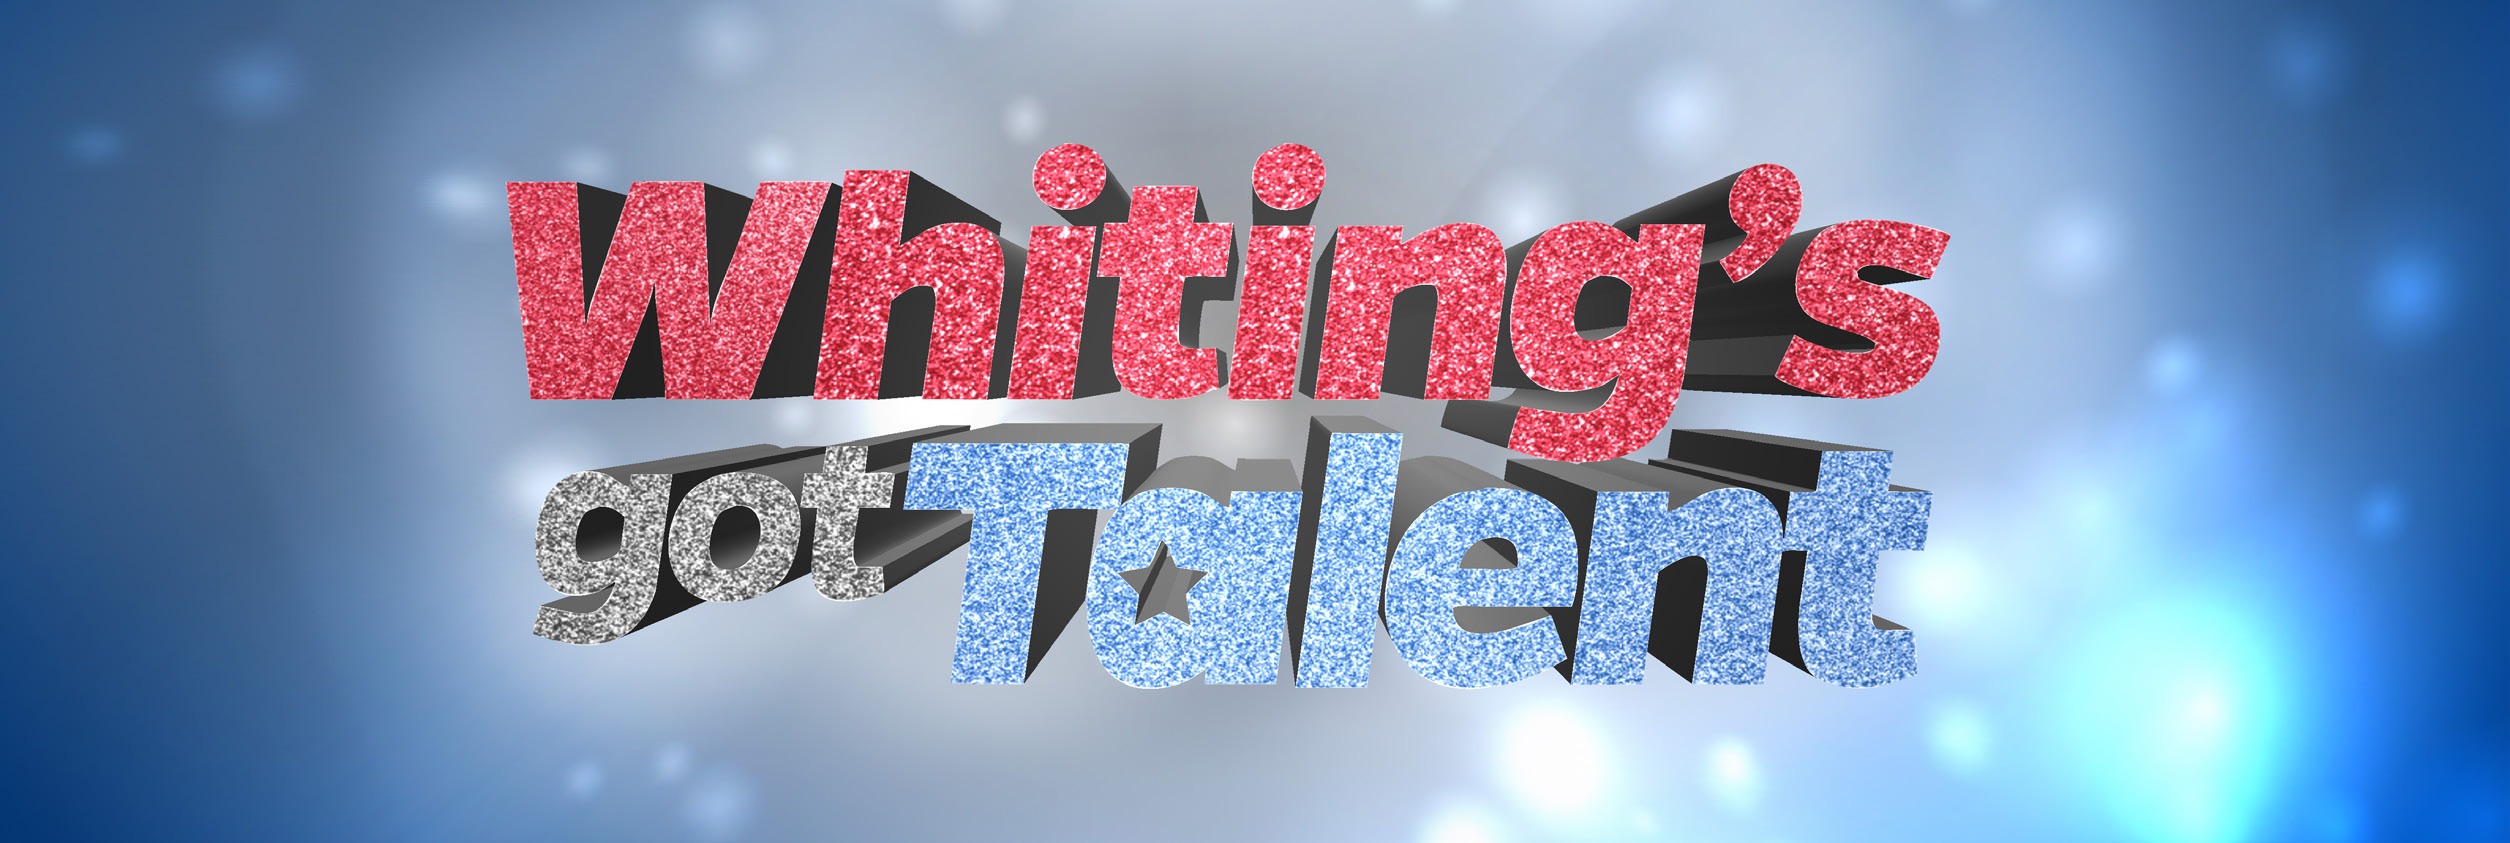 Glittery 3D image of the words "Whiting's got Talent"